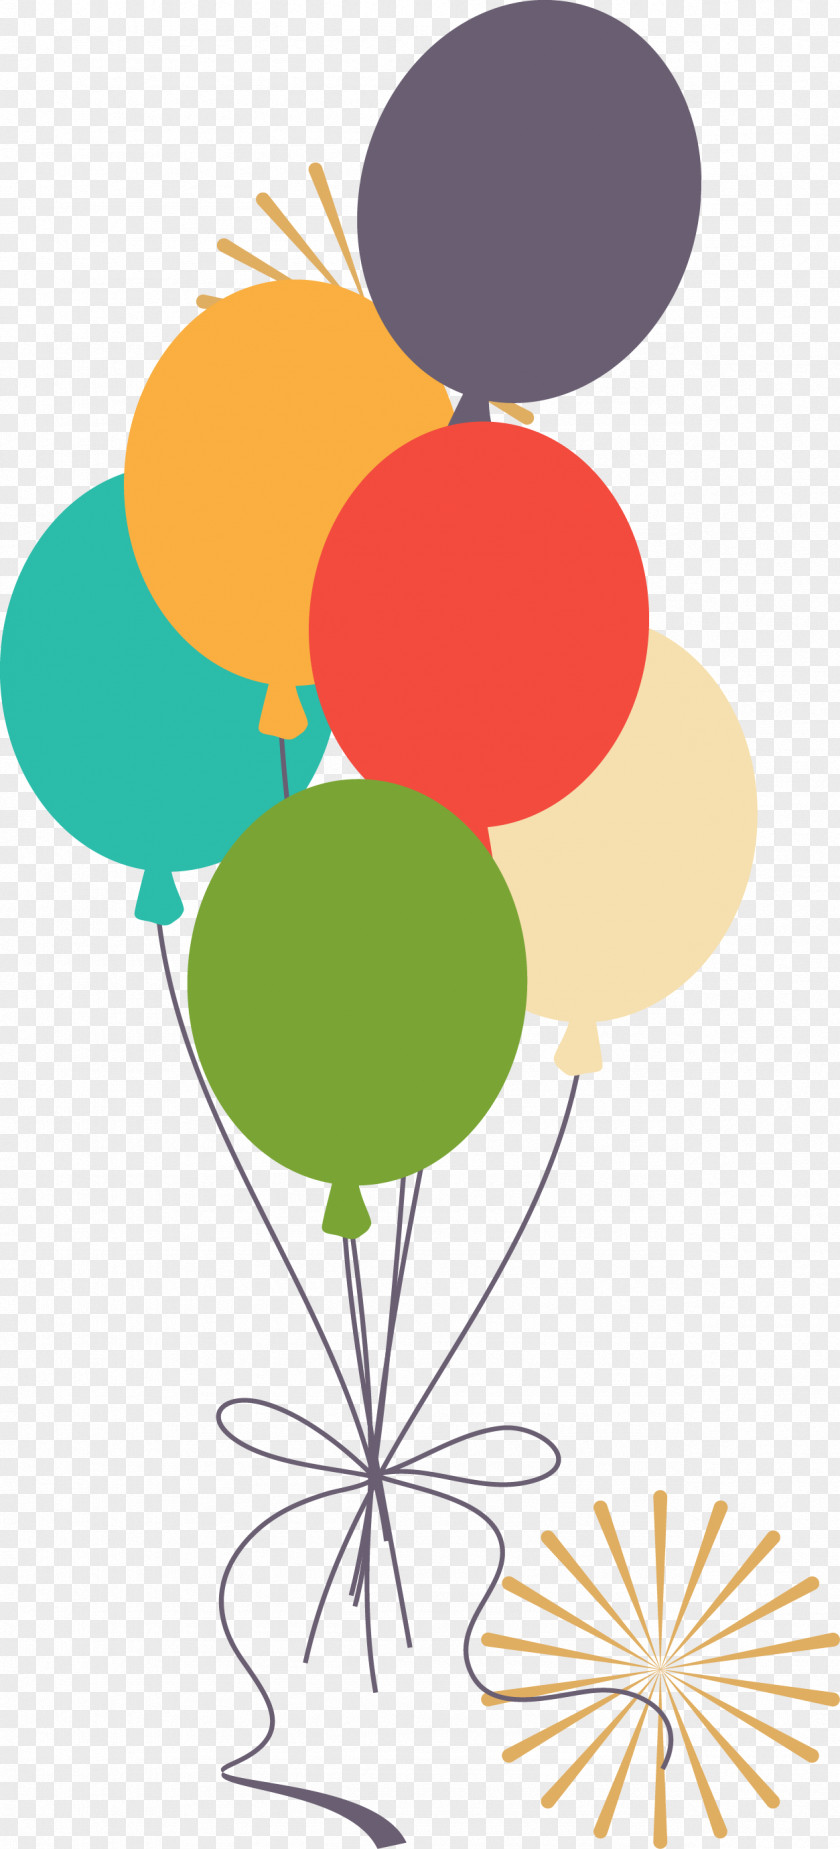 Colored Balloons Vector Illustration Balloon PNG